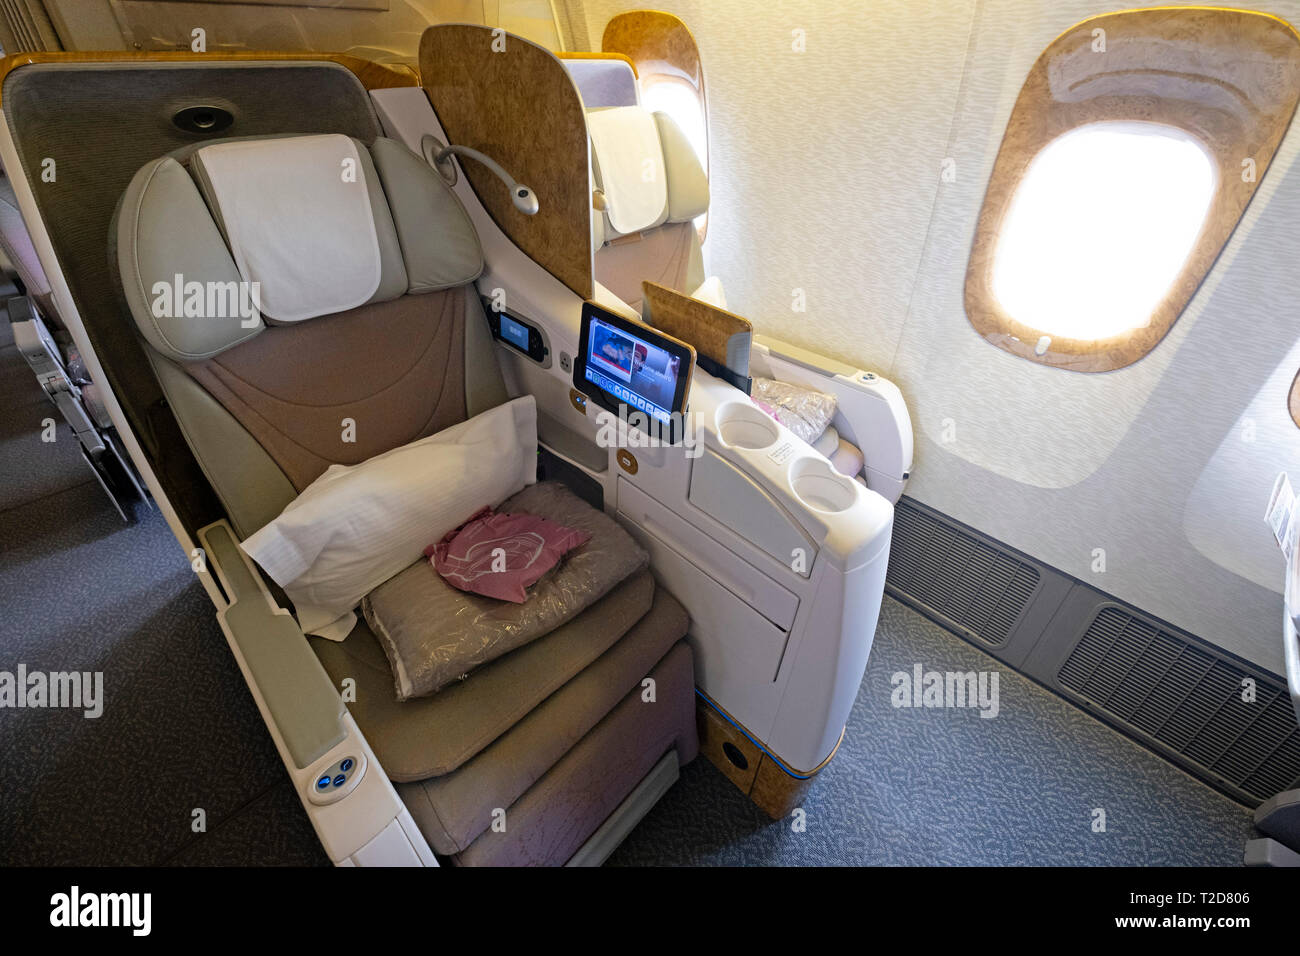 Spacious business class empty window seats with pillows and multimedia screen on a Emirates commercial flight airplane Stock Photo